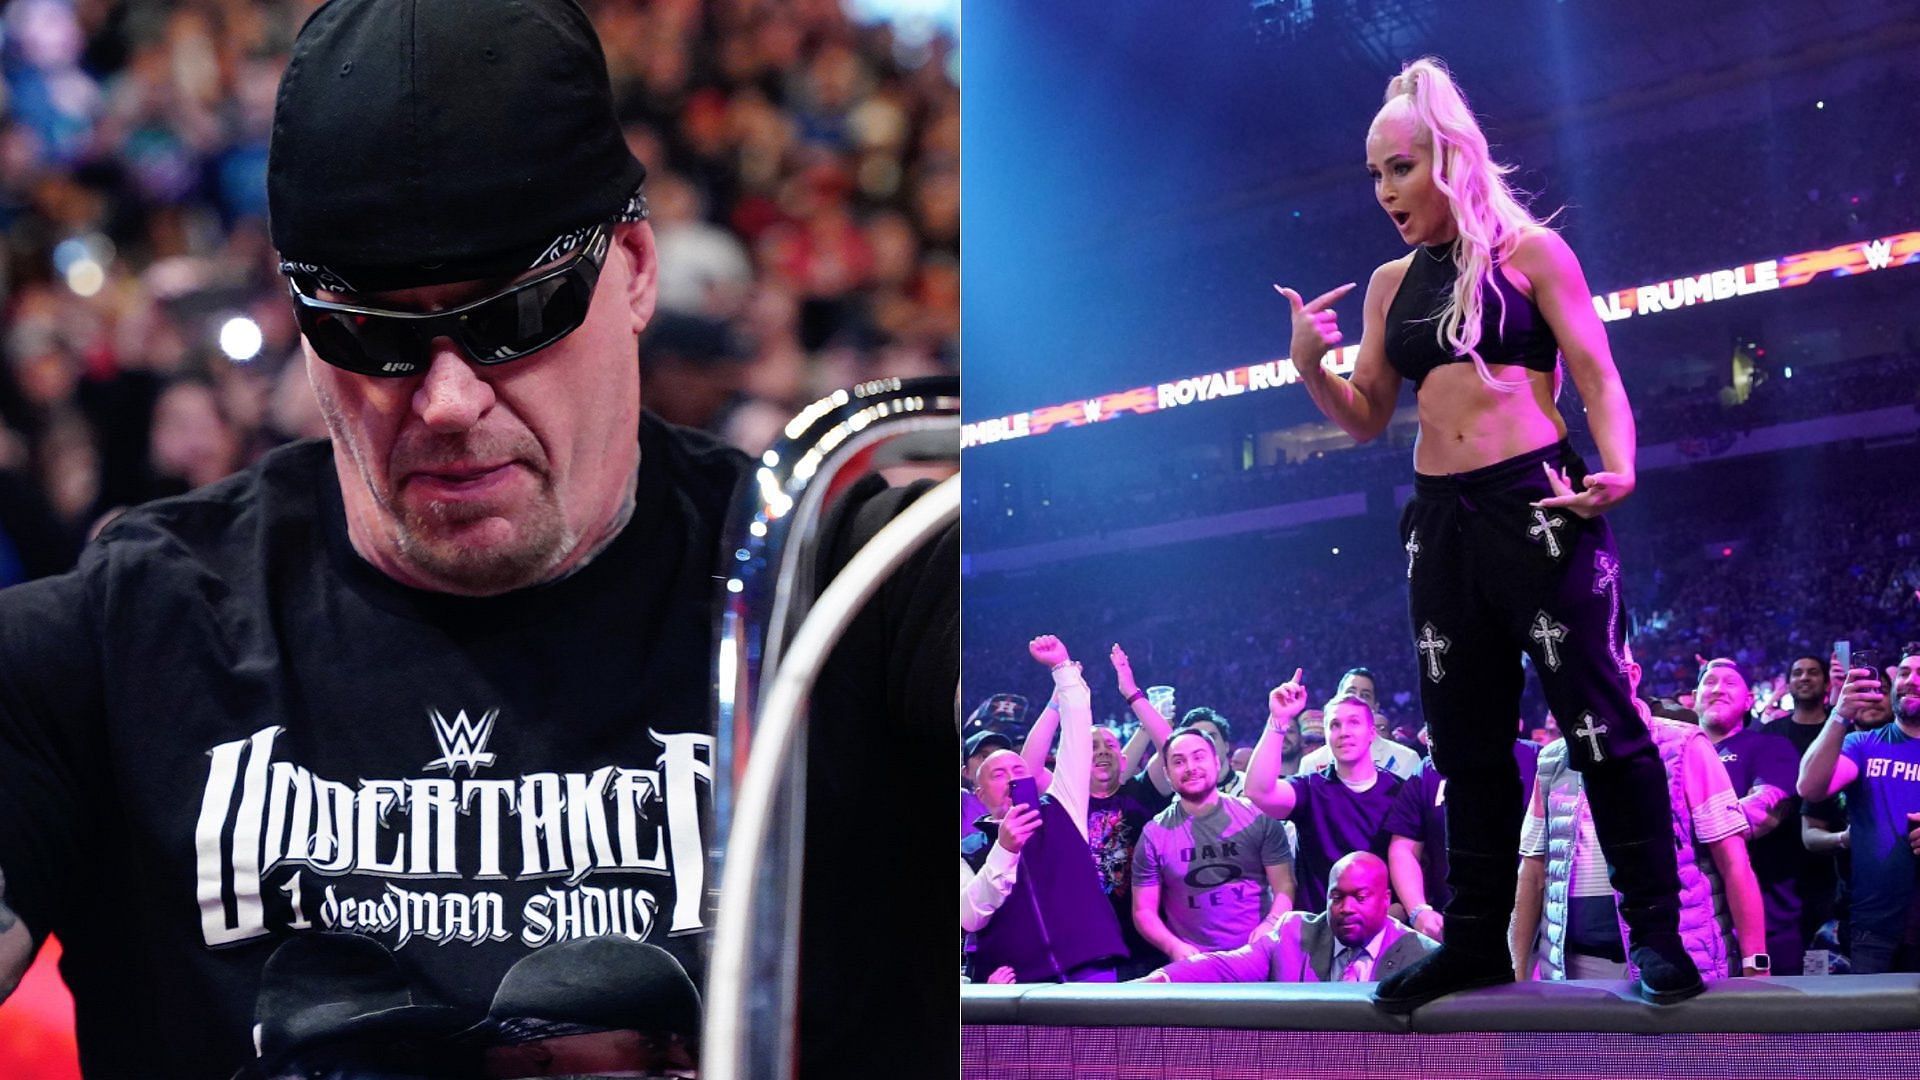 The Undertaker and Michelle McCool